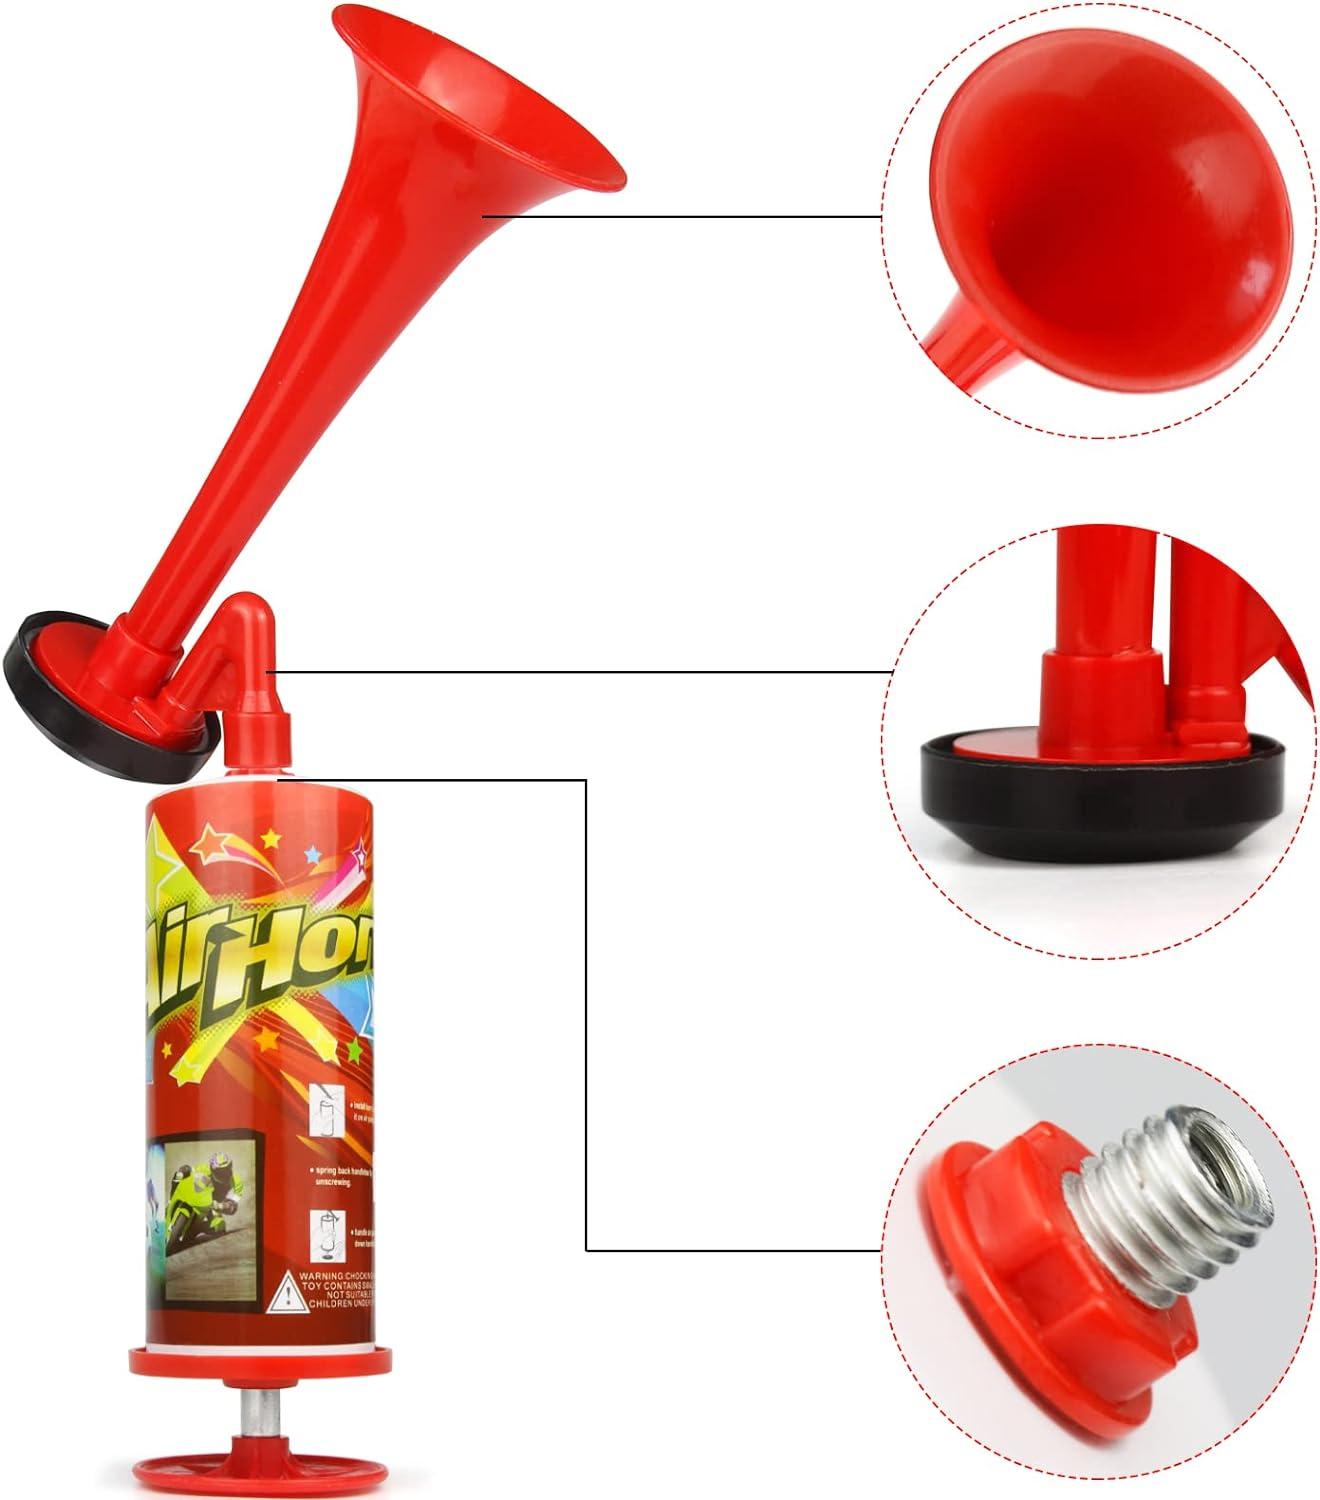 Streetwize SWHH Reusable Handheld Air Horn Clam Pack – Gasless Air Horn  with Pump Action, For Stag Parties, Rugby Matches, Parties